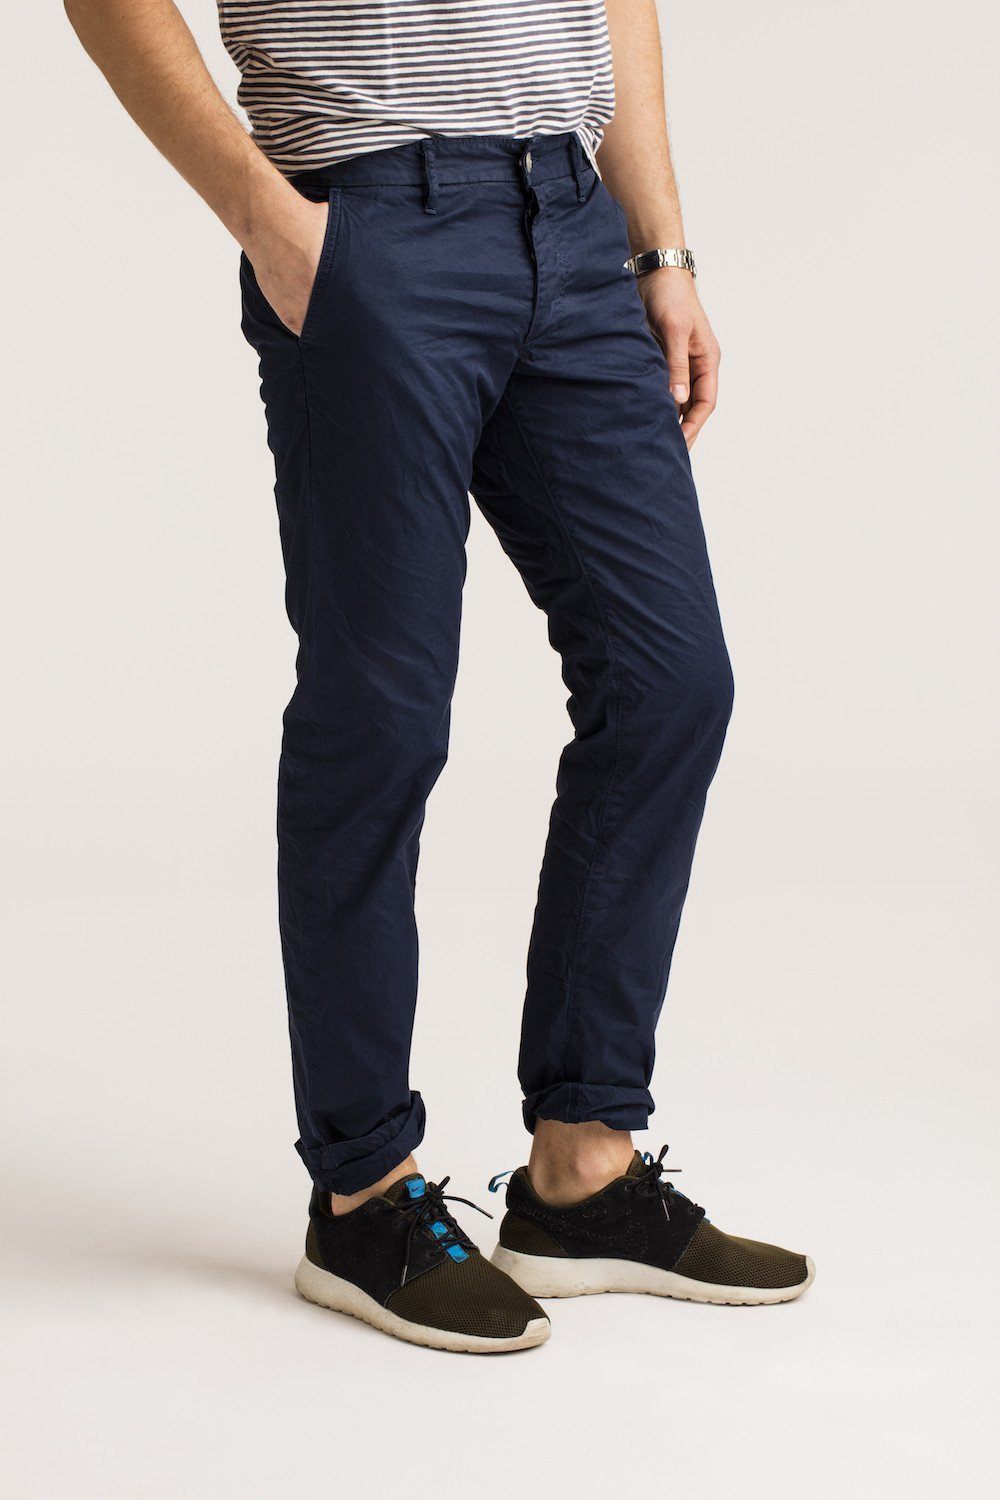 https://www.grownandsewn.com/cdn/shop/products/independent-slim-pant-ultimate-twill-navy-319045_1200x.jpg?v=1677262924